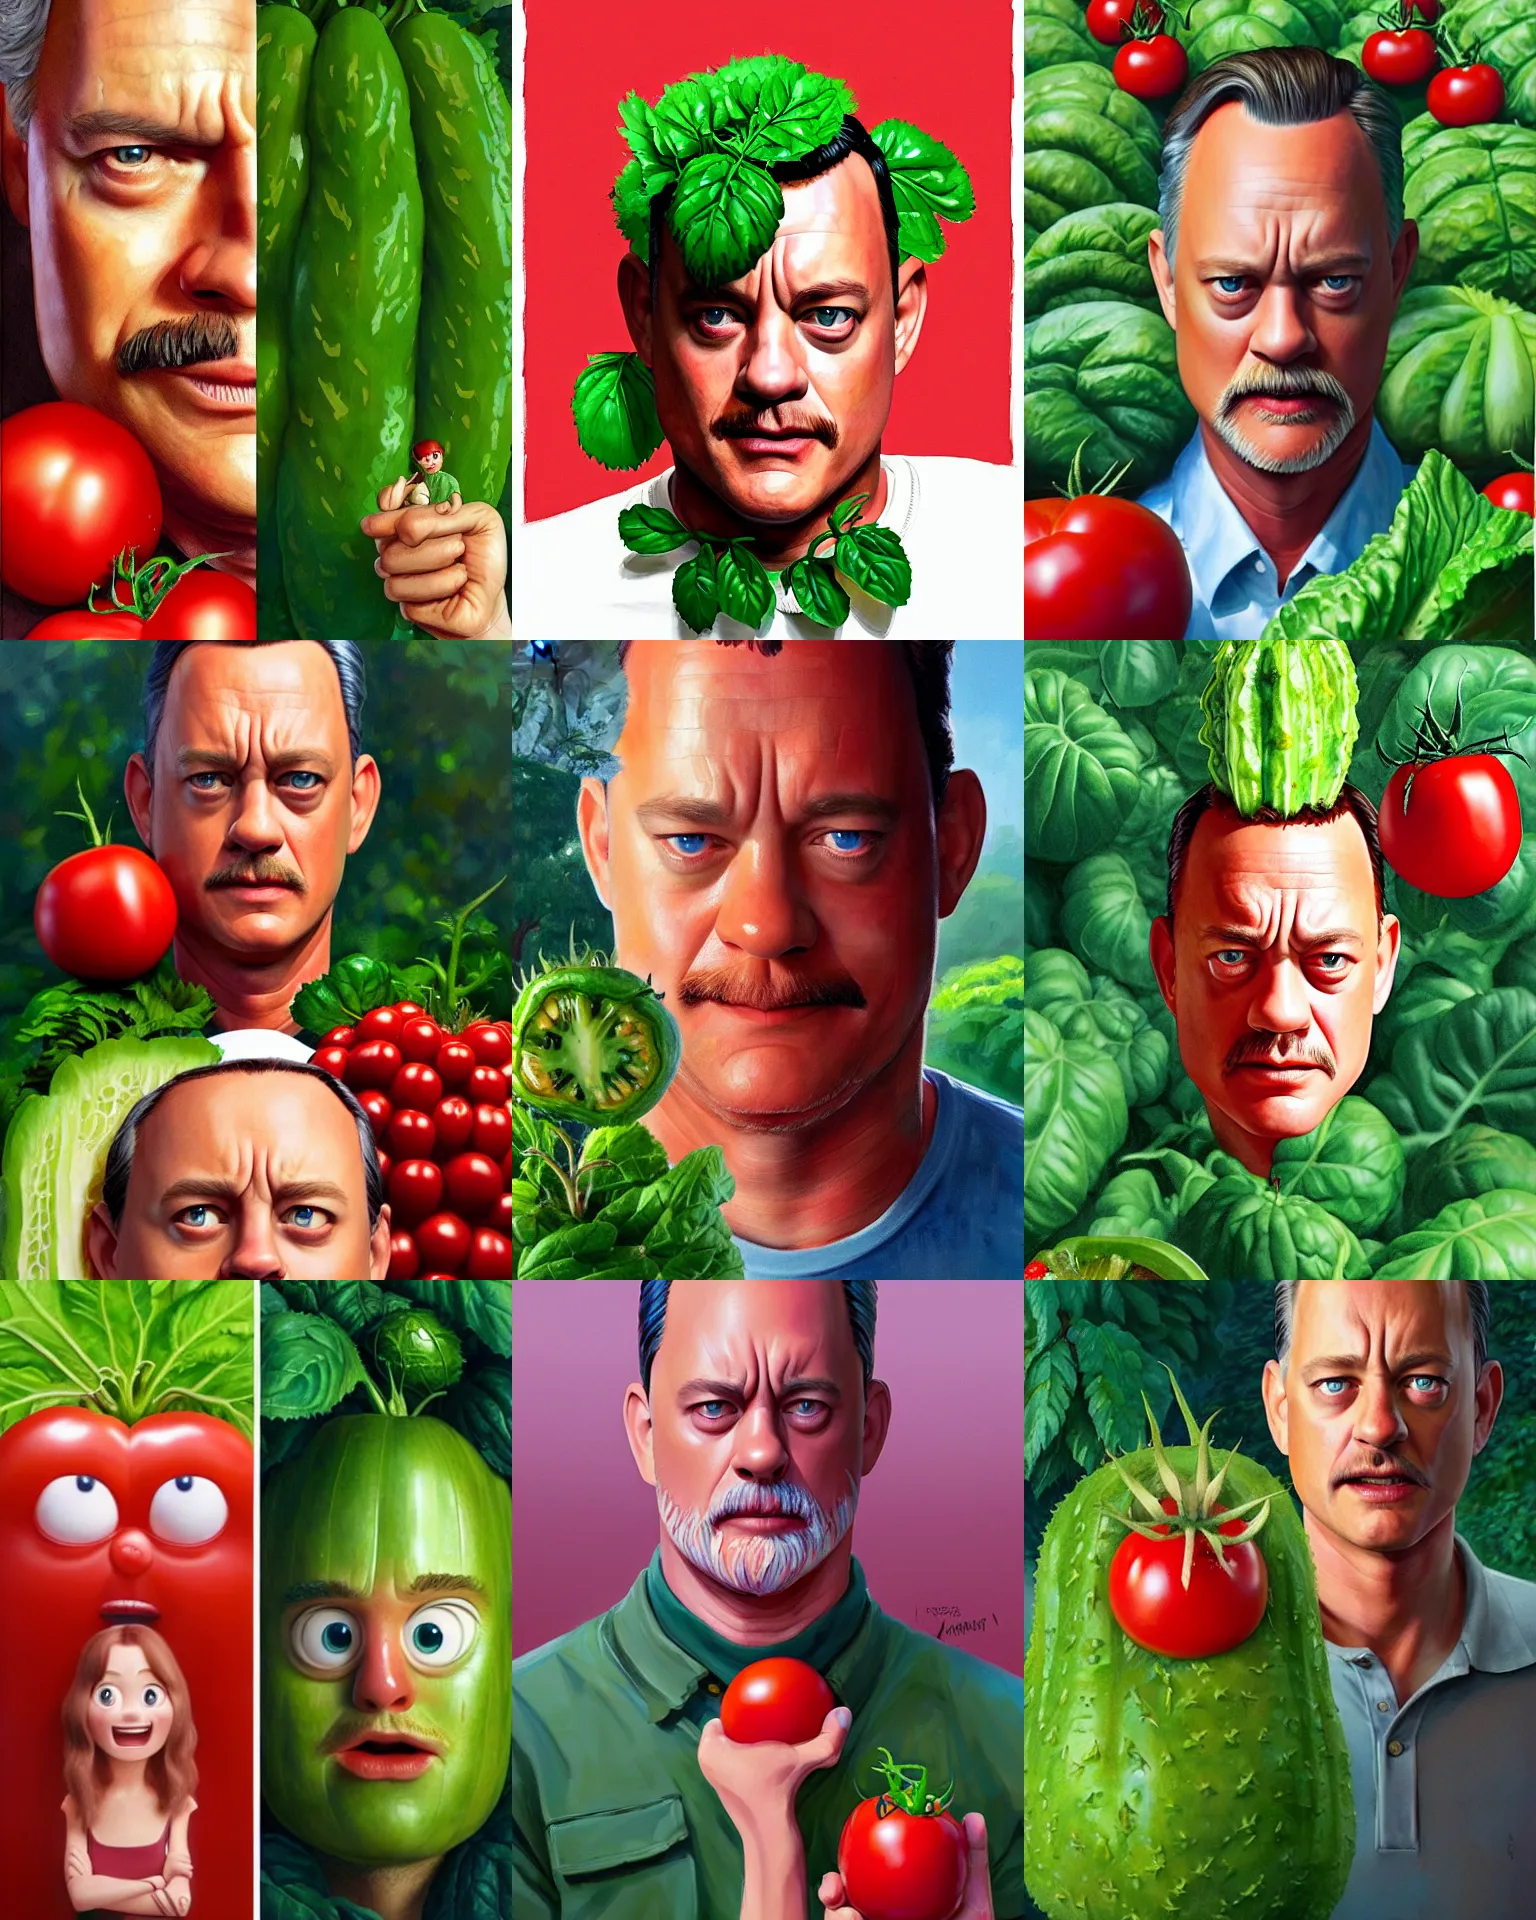 Prompt: forest gump starring tom hank sas a tomato, his skin is red with leafy green hair, pickle rick animation character, dramatic lighting, tom hanks tomato face, tomato body, shaded lighting poster by magali villeneuve, artgerm, jeremy lipkin and michael garmash, rob rey and kentaro miura style